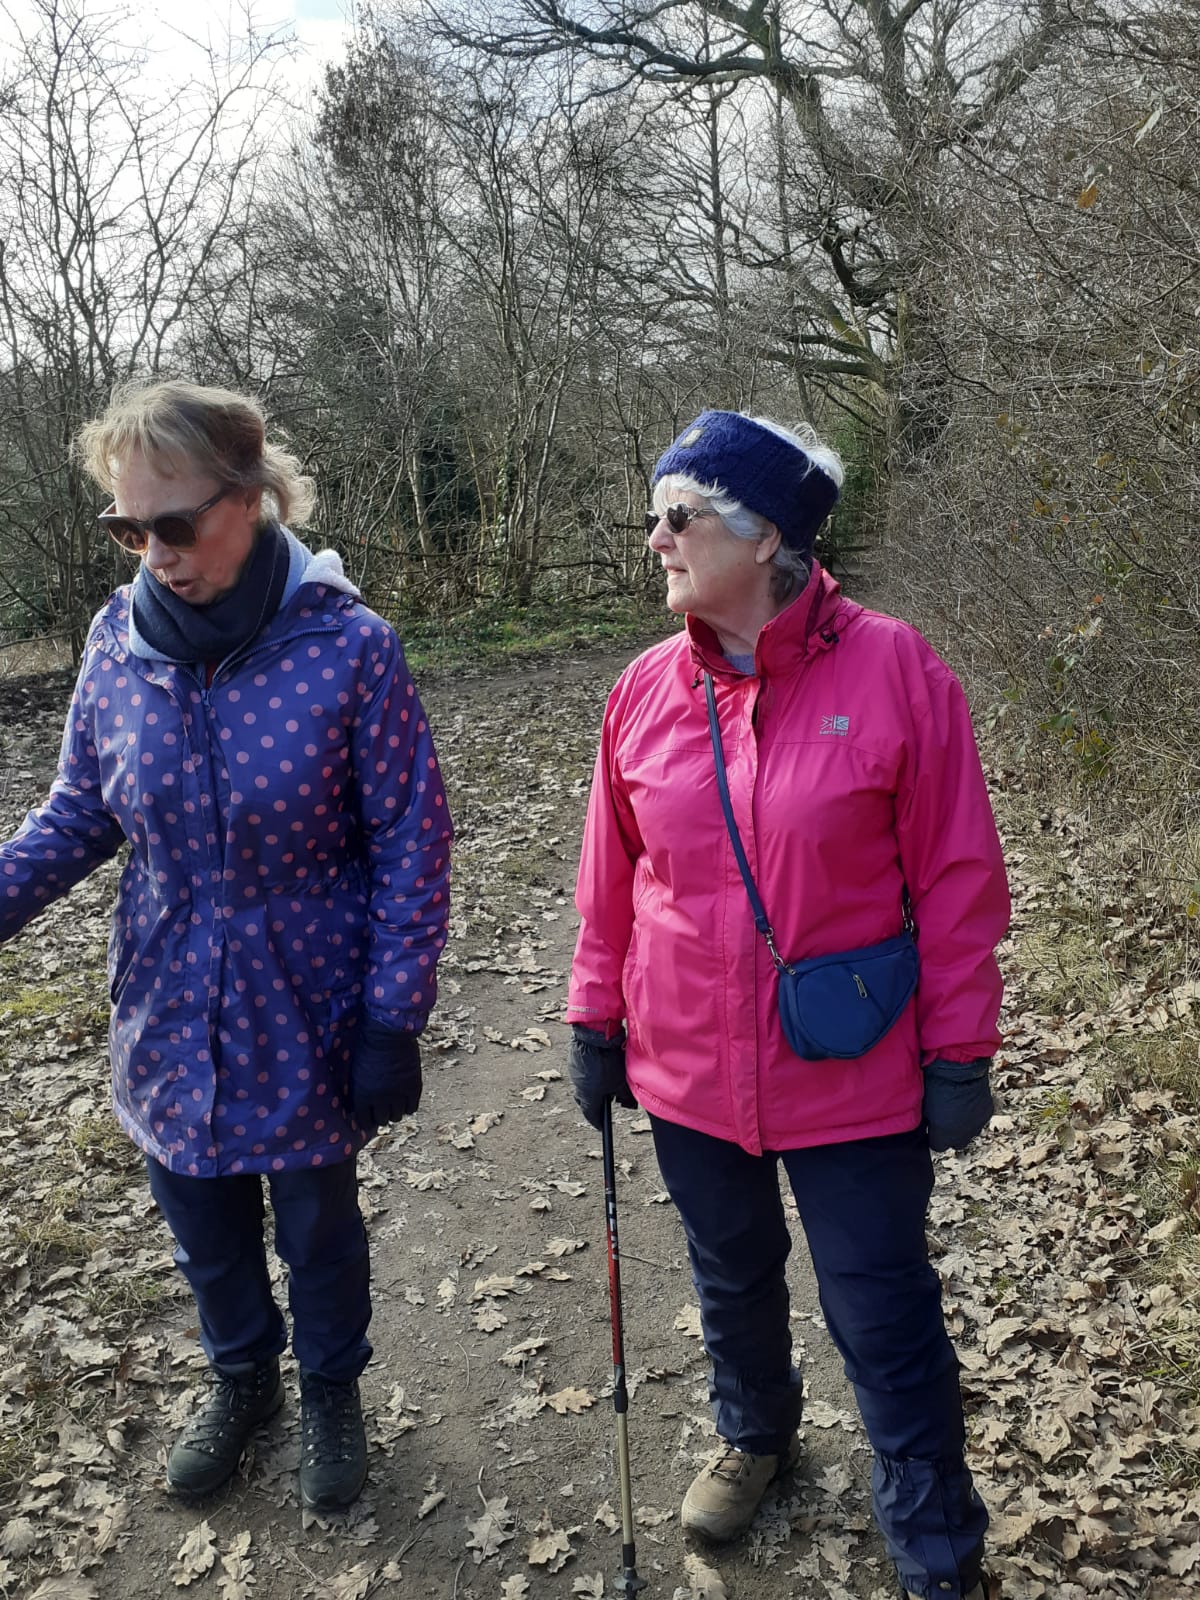 Lovely colourful ladies walking